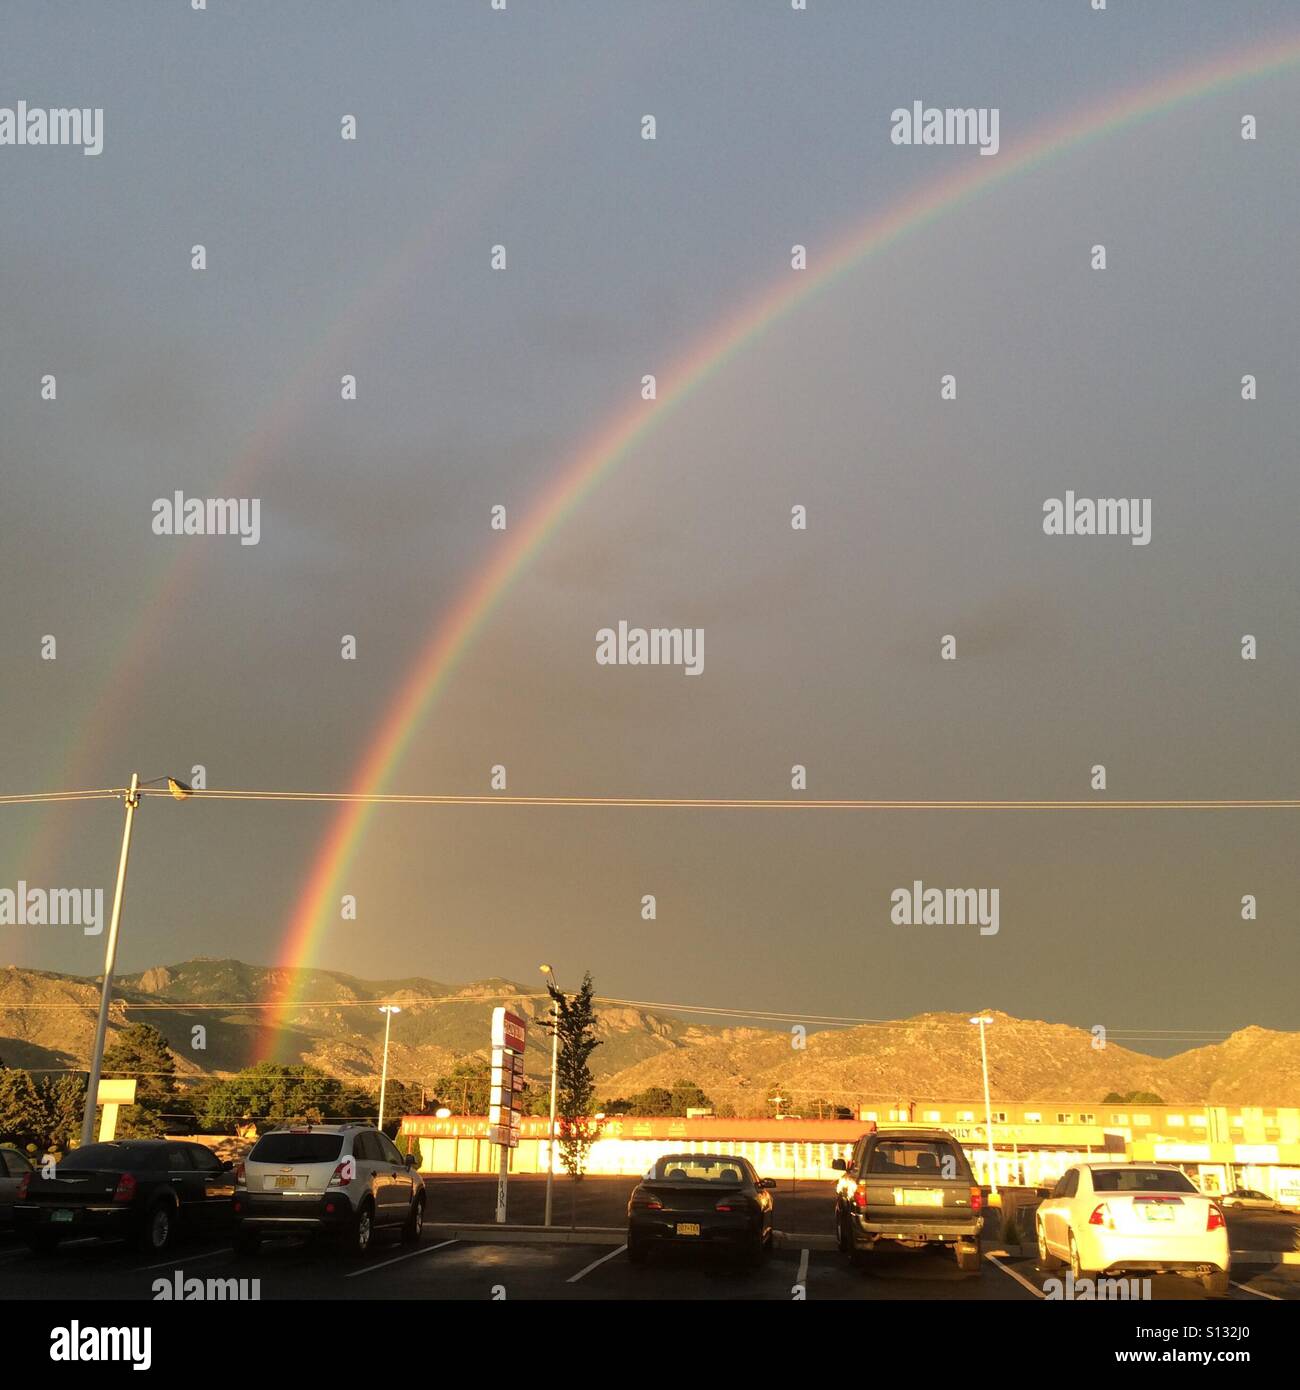 Double rainbow rising above a parking lot. Stock Photo